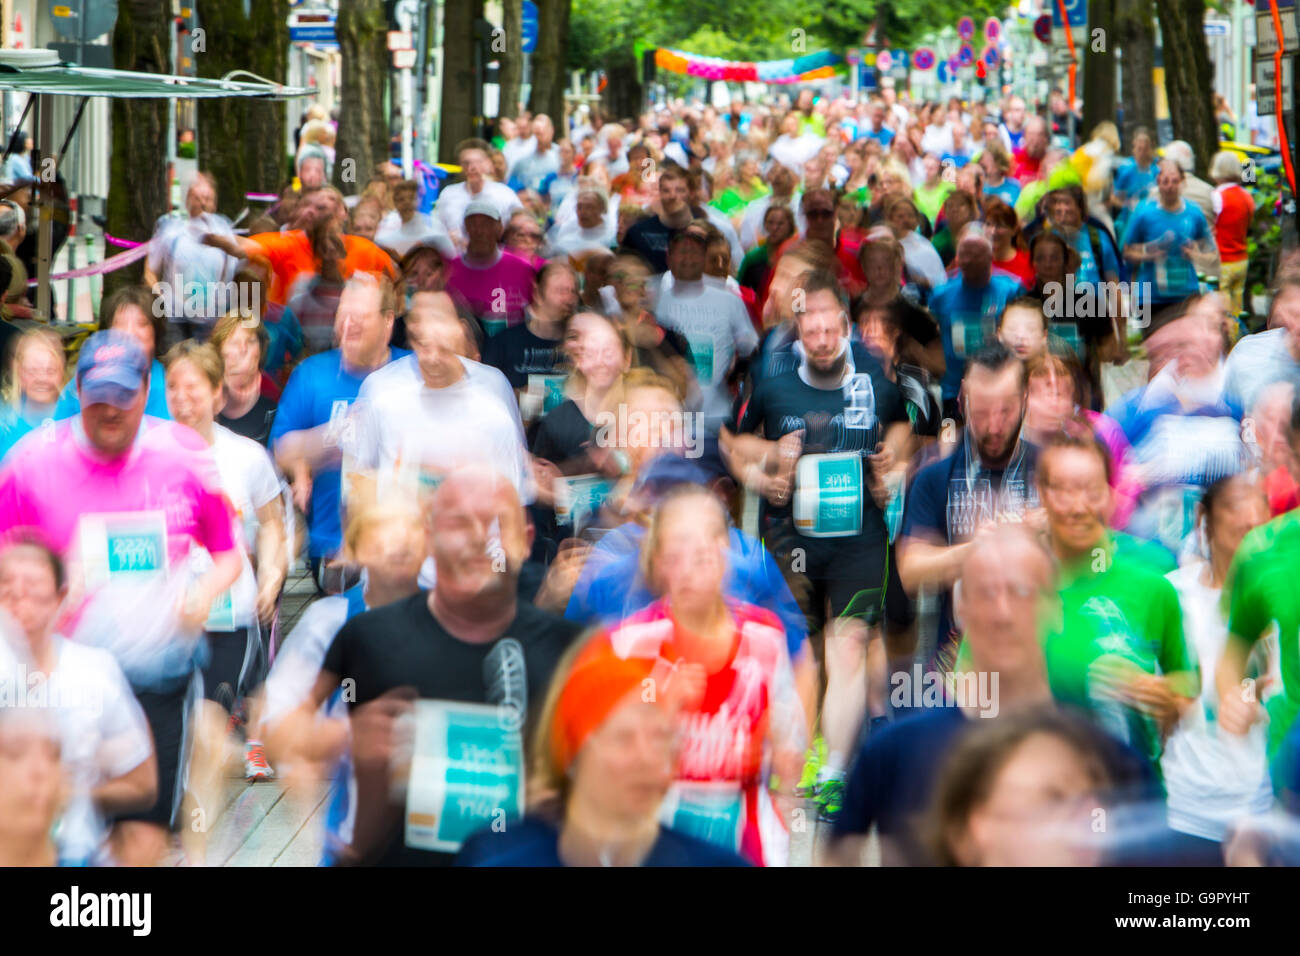 Annual company city run, with over 10000 participants, a 5 Kilometer run for company teams through the city of Essen, Germany Stock Photo